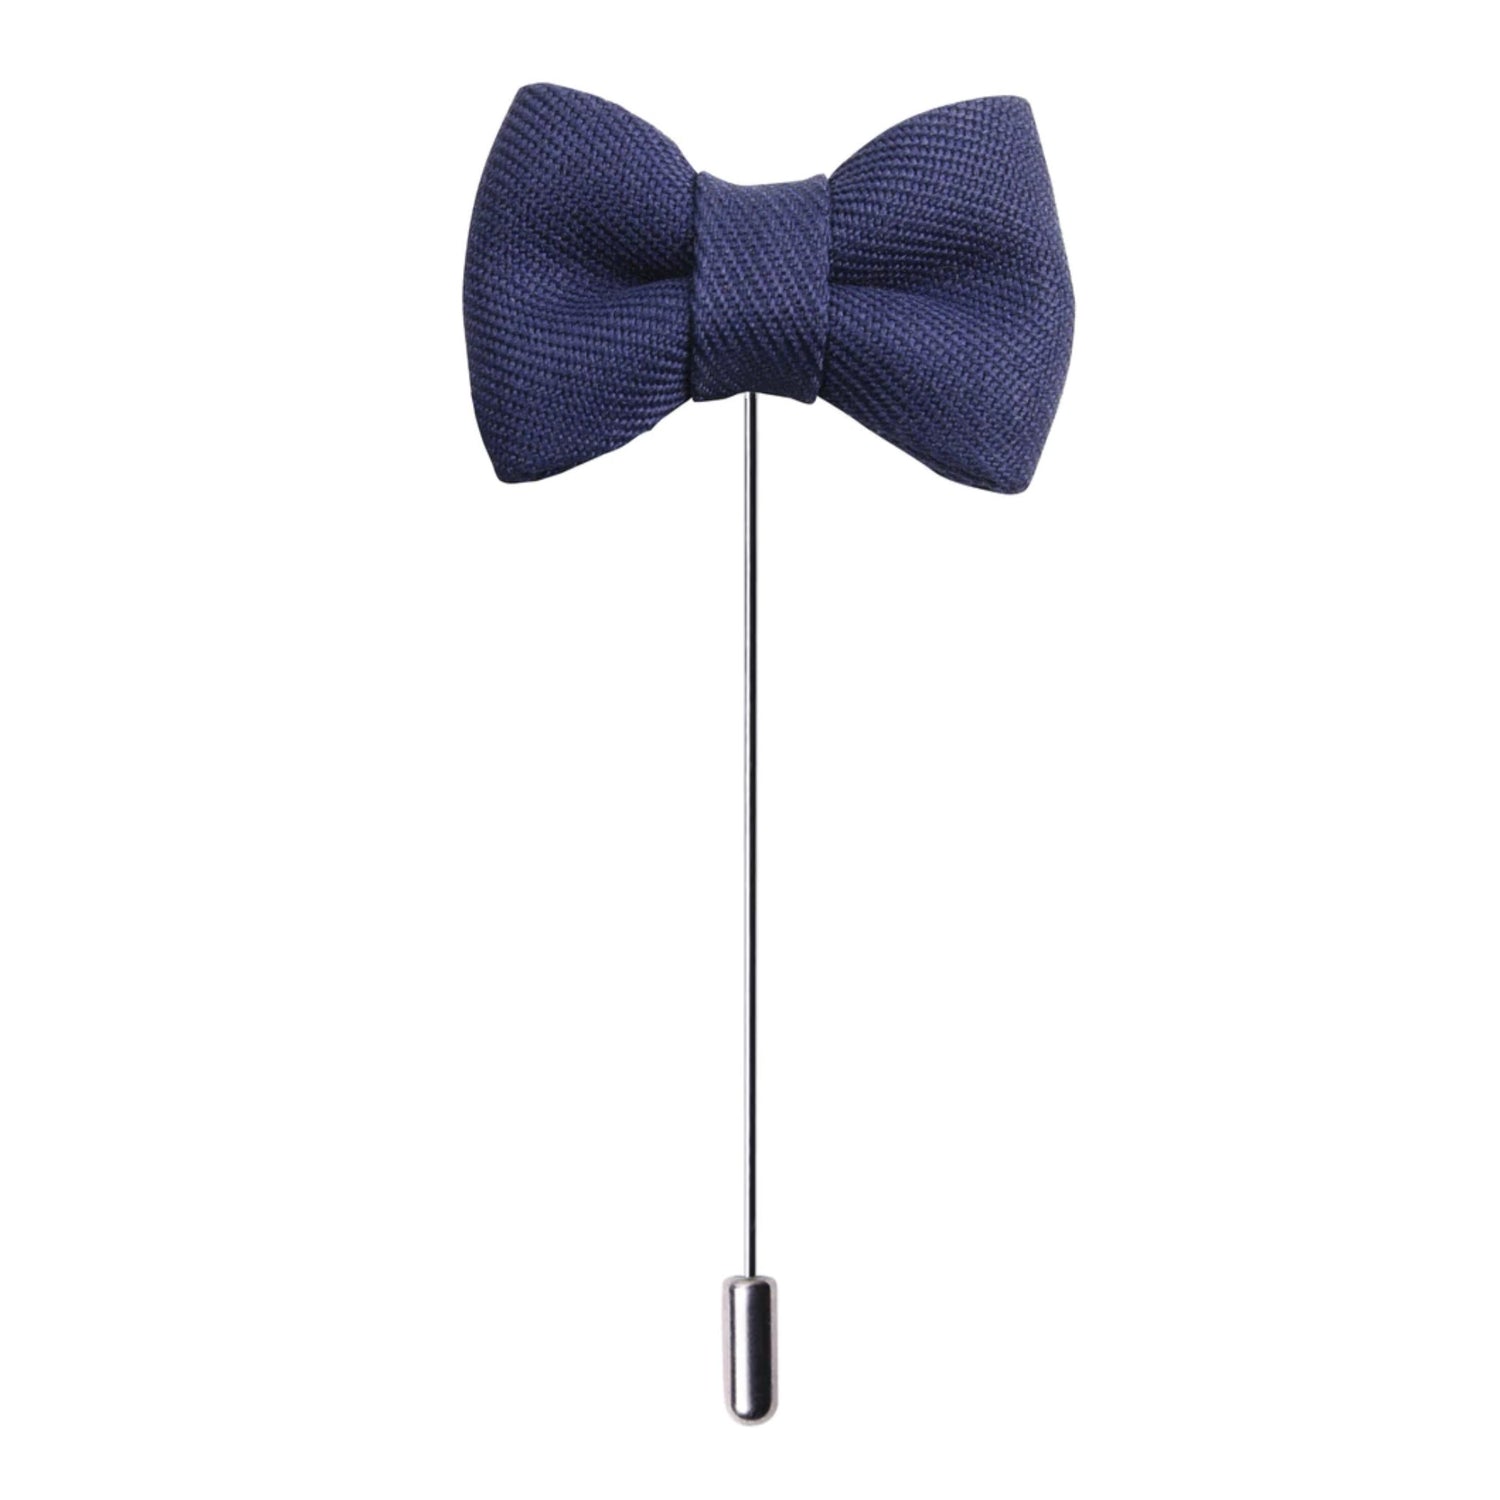 A Blue Colored Bow Tie Shaped Lapel Pin||Deep Blue